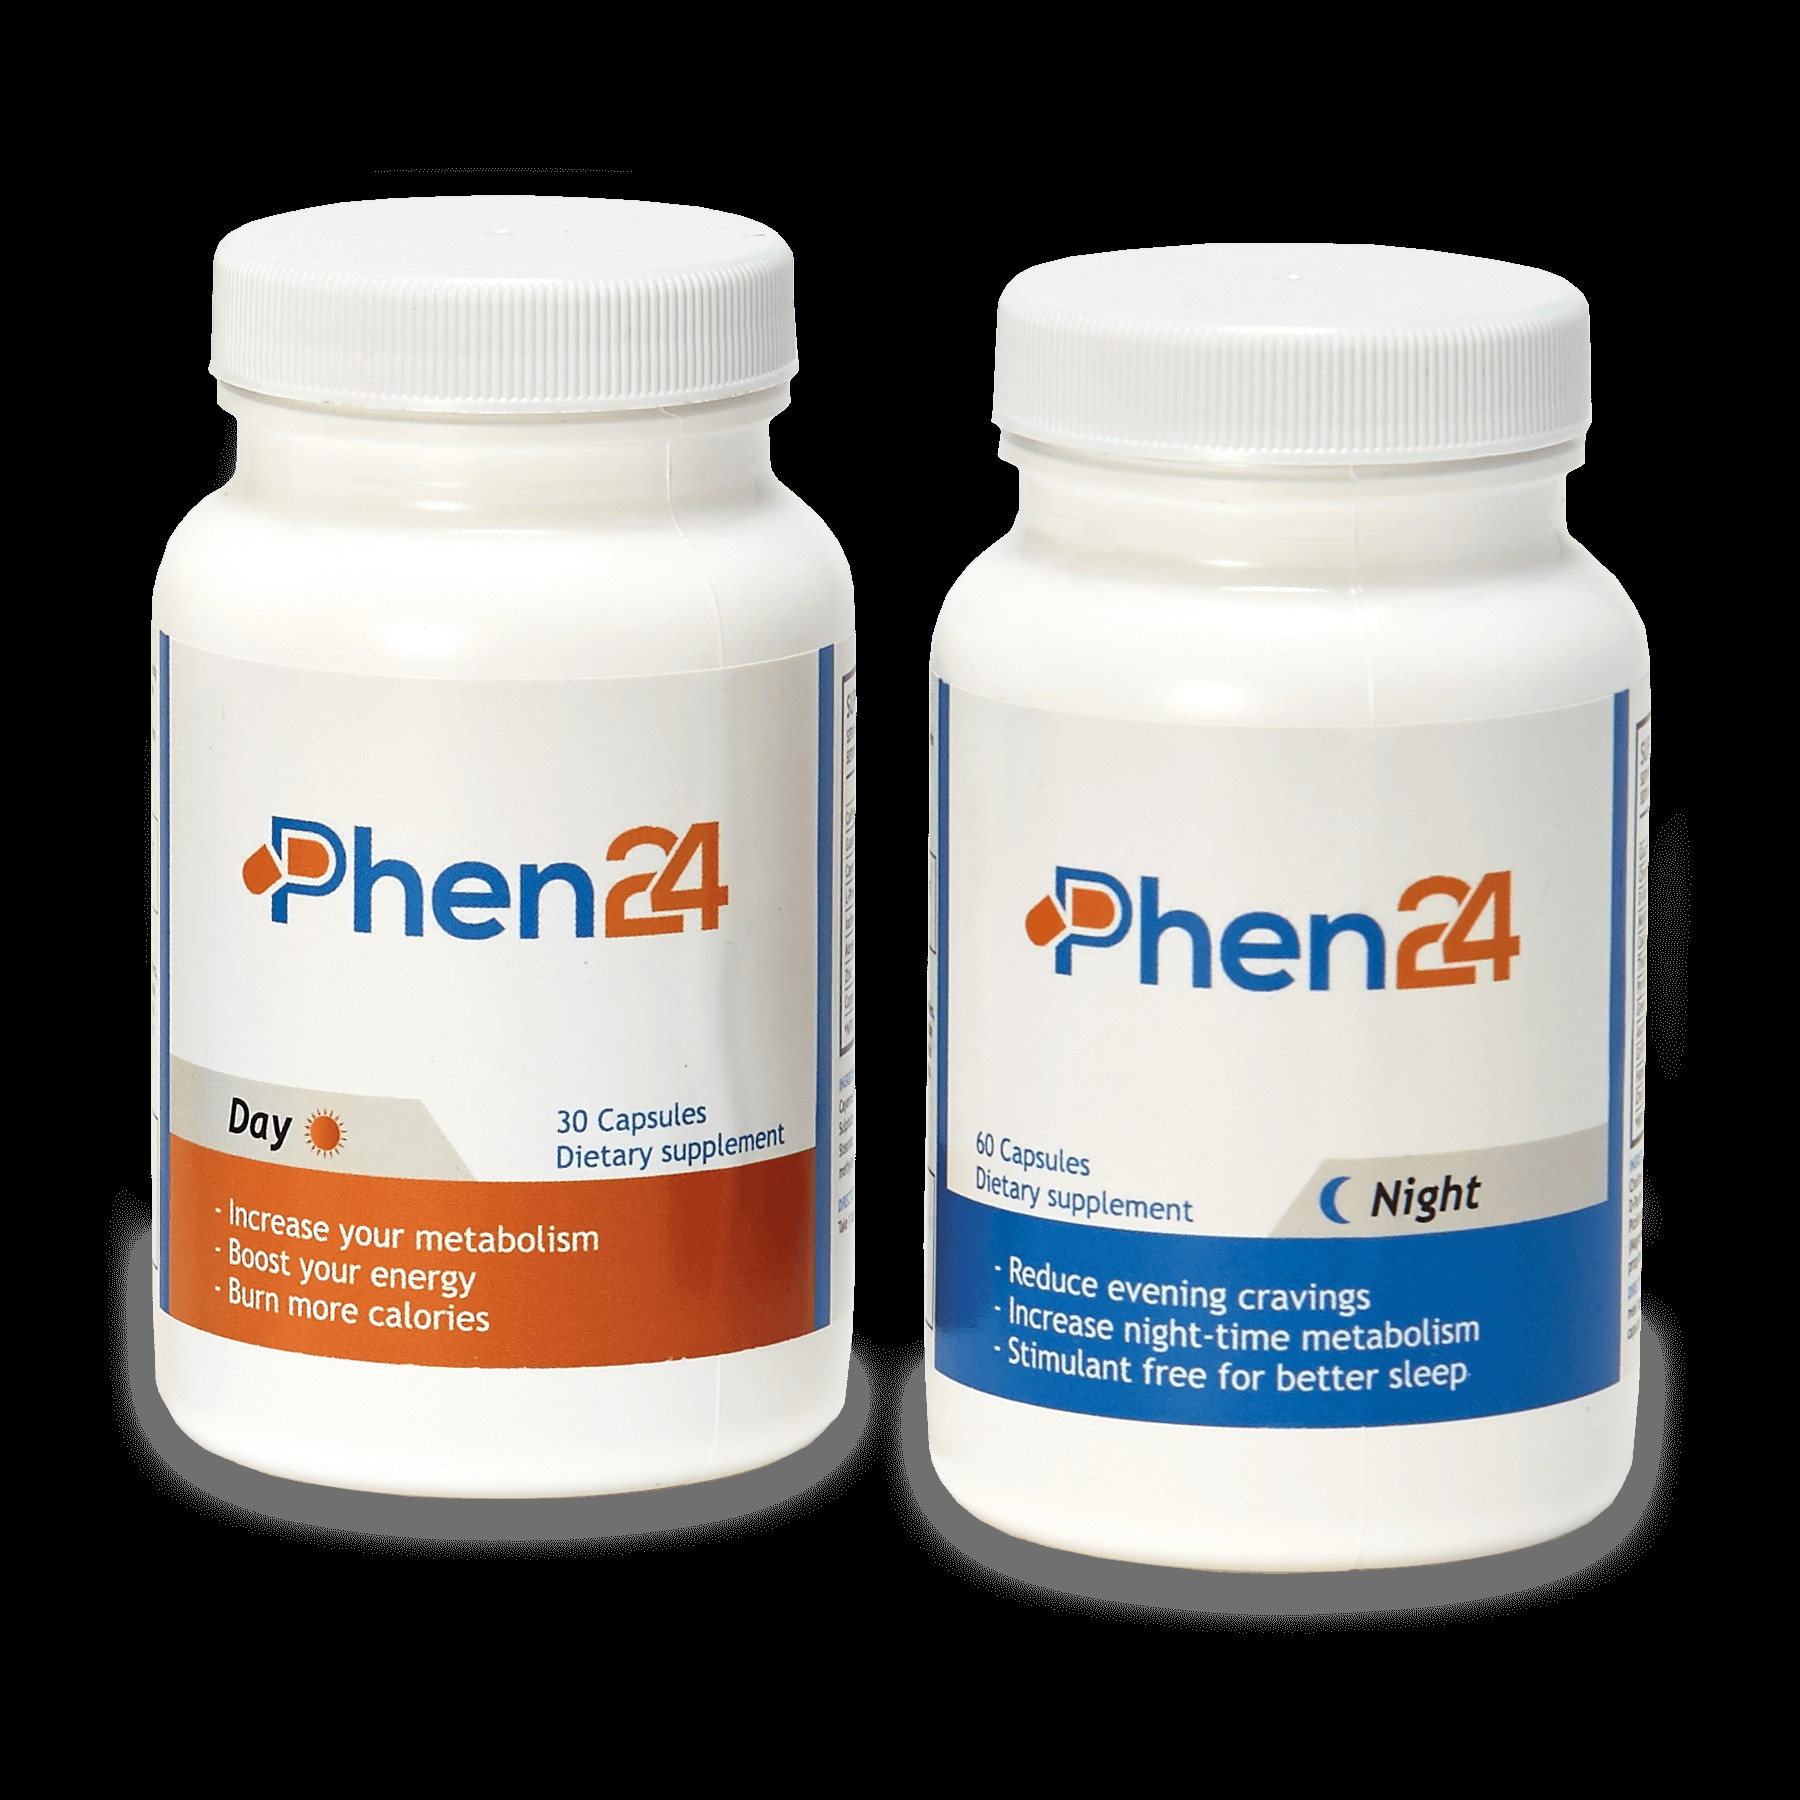 Top Weight Loss Supplements
 Phen24 Reviews – The Key to Lose Your Weight Safely and